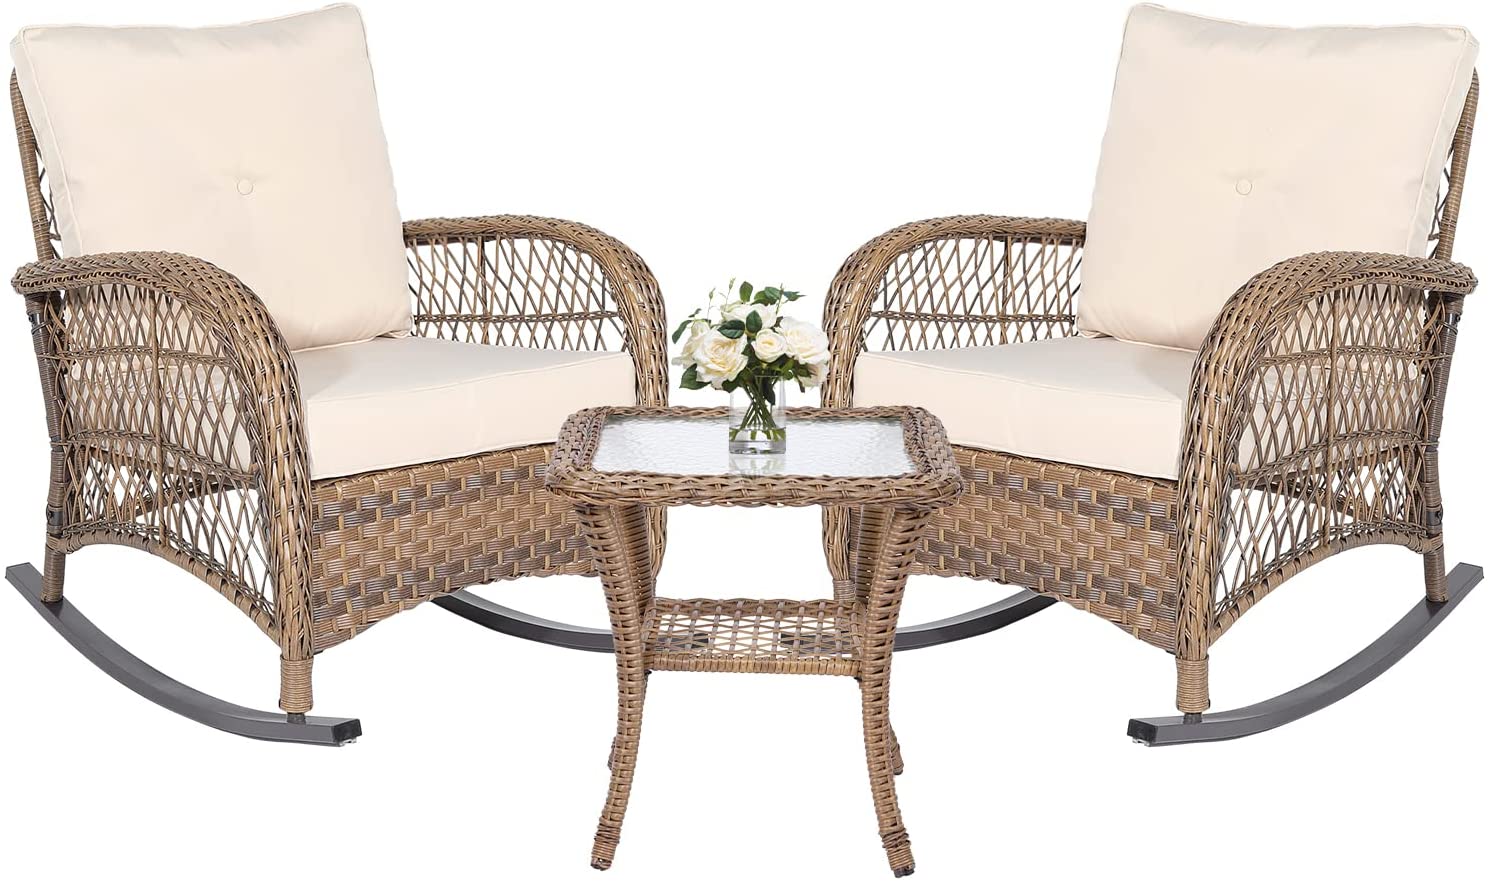 MEETWARM 3 Pieces Patio Wicker Rocking Chair Set, Rattan Outdoor Rocker Chairs Set with Cushions and Glass-Top Coffee Table, Conversation Bistro Set for Porch & Backyard - Beige - image 1 of 7